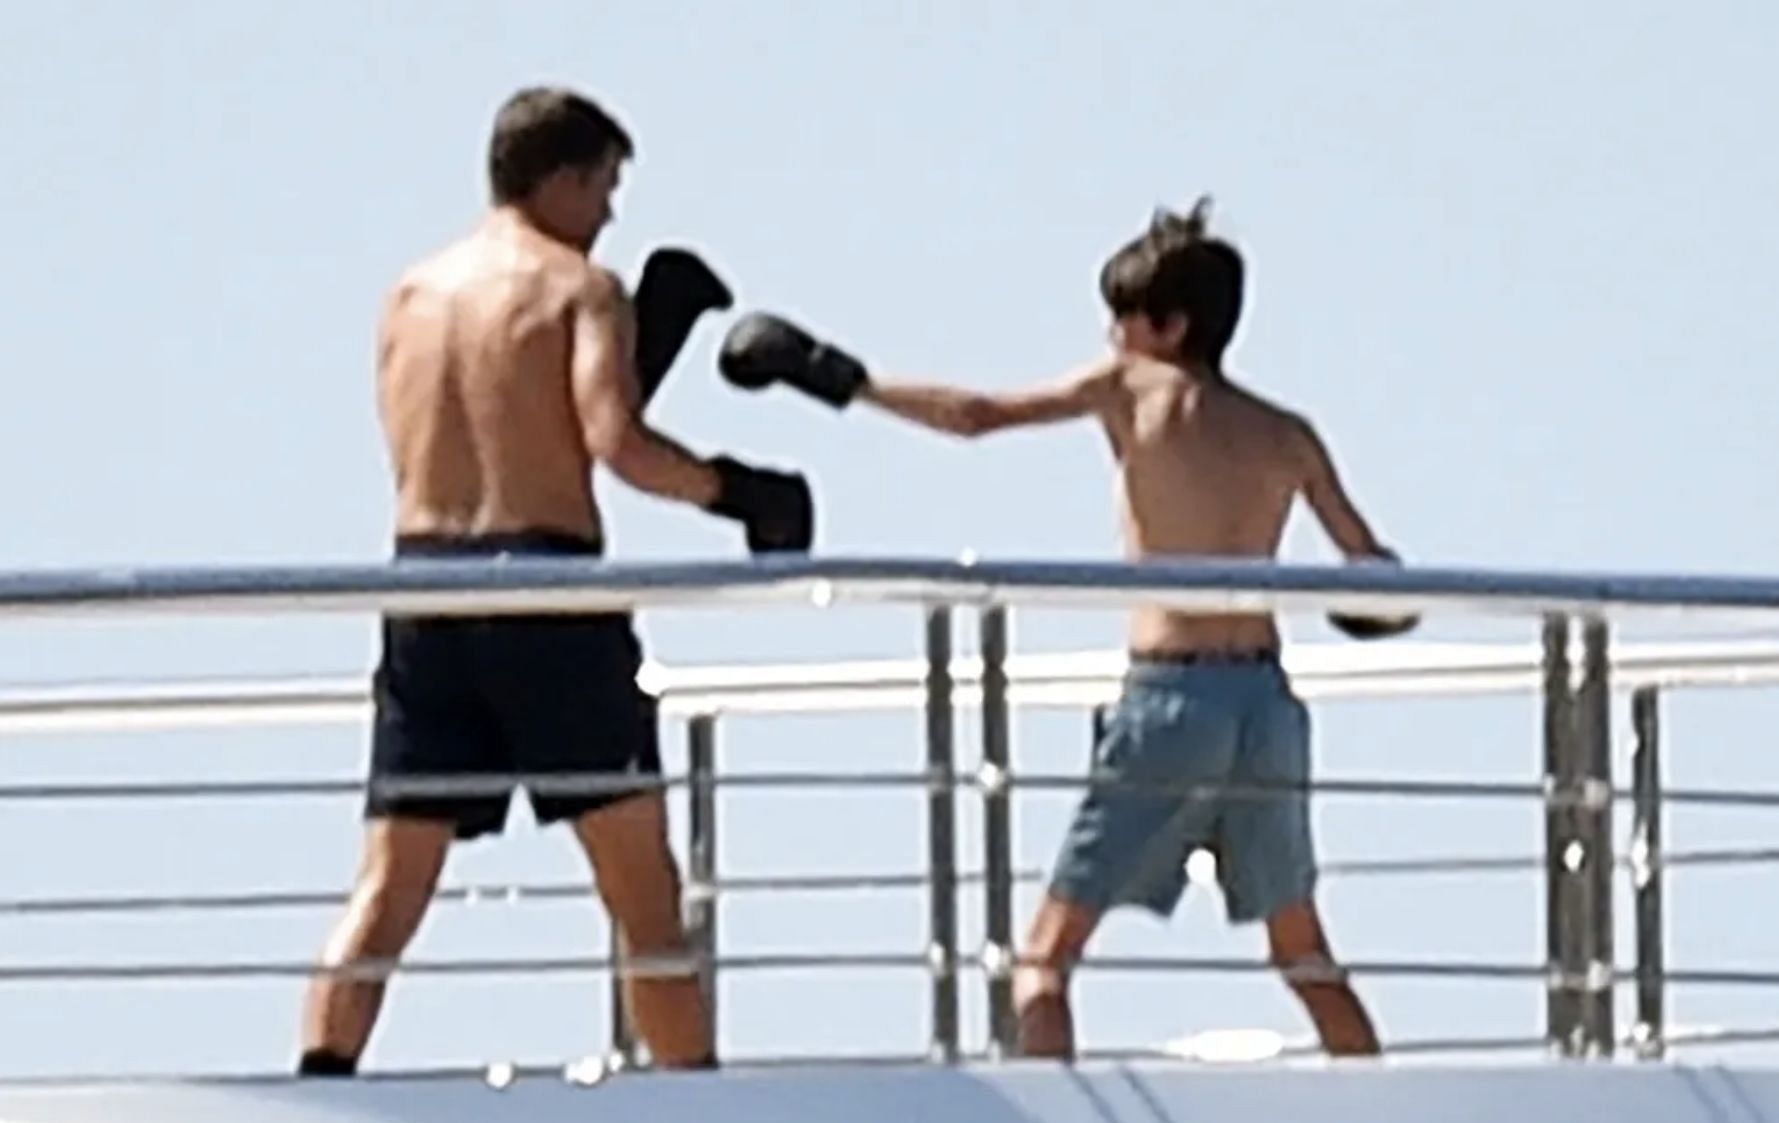 Brady sparring with one of his sons on the yacht. Source: TMZ